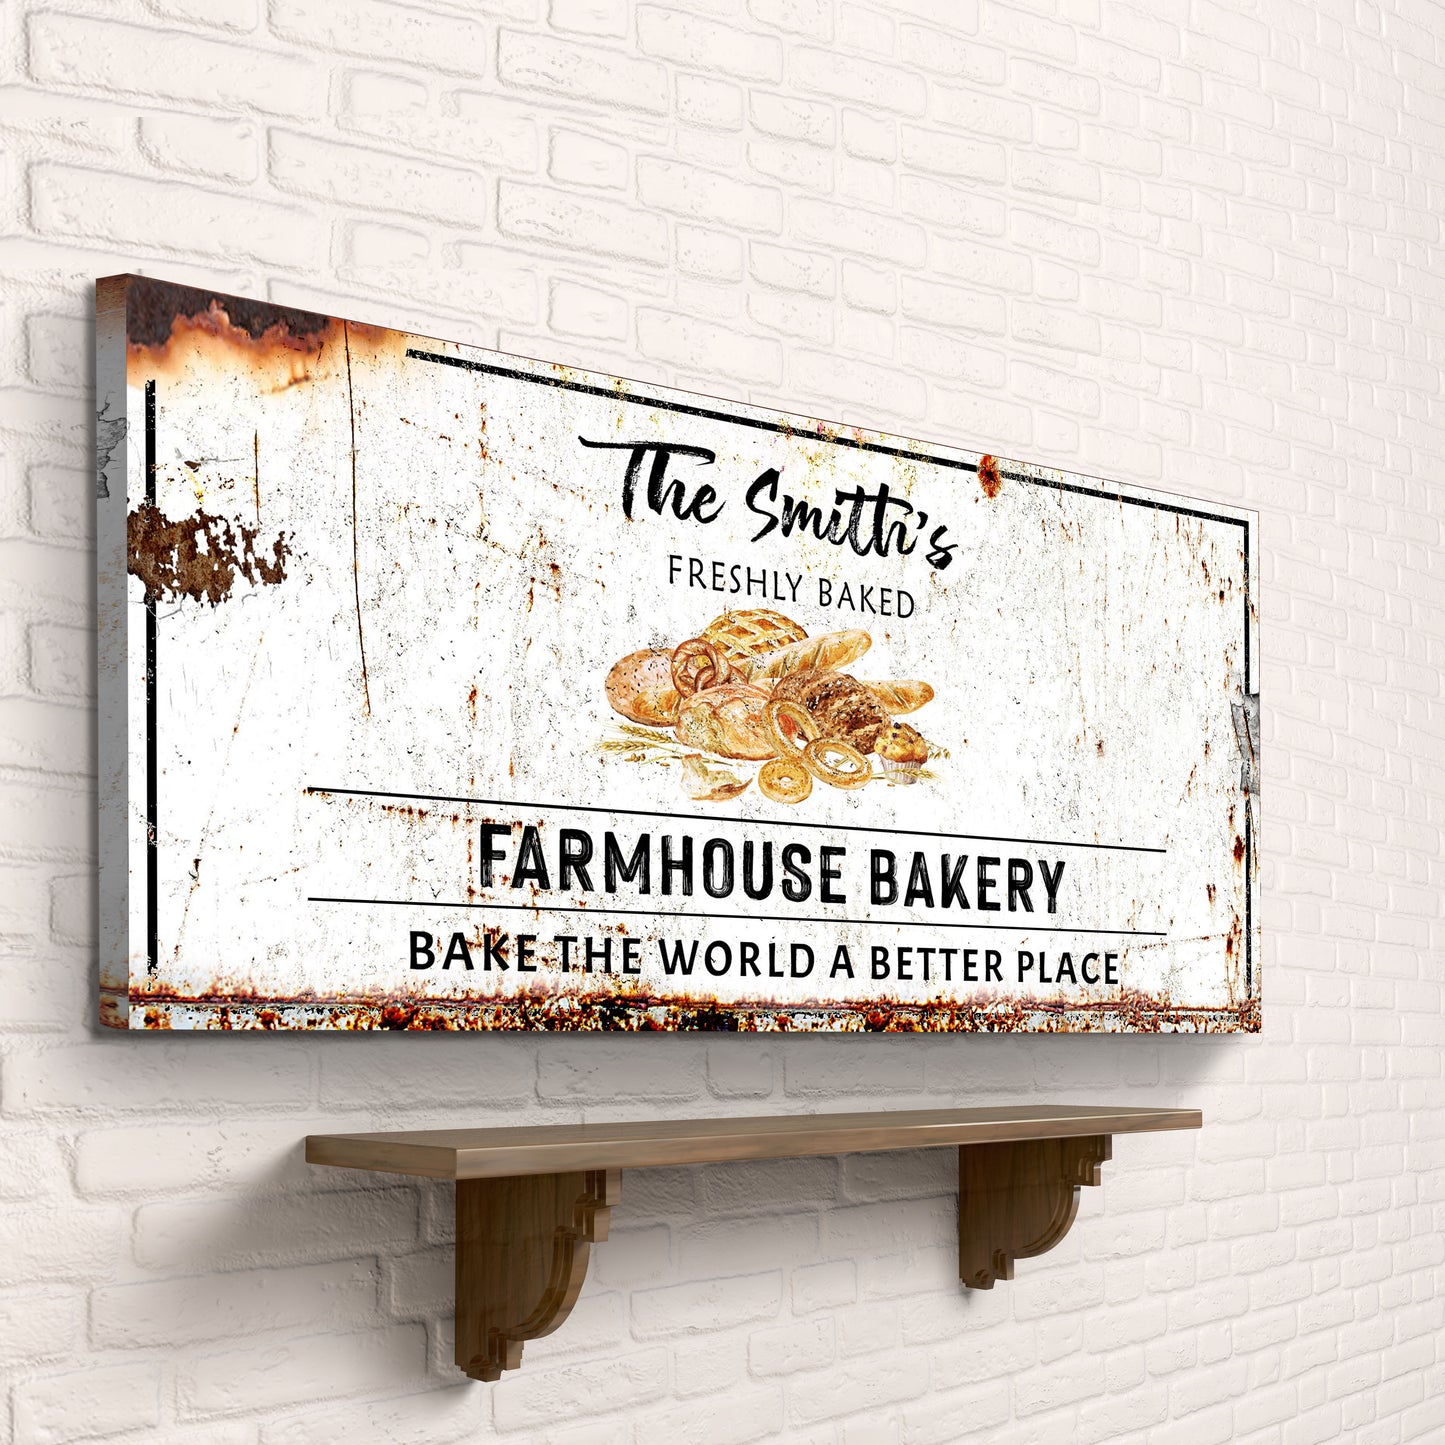 Farmhouse Bakery Sign - Image by Tailored Canvases